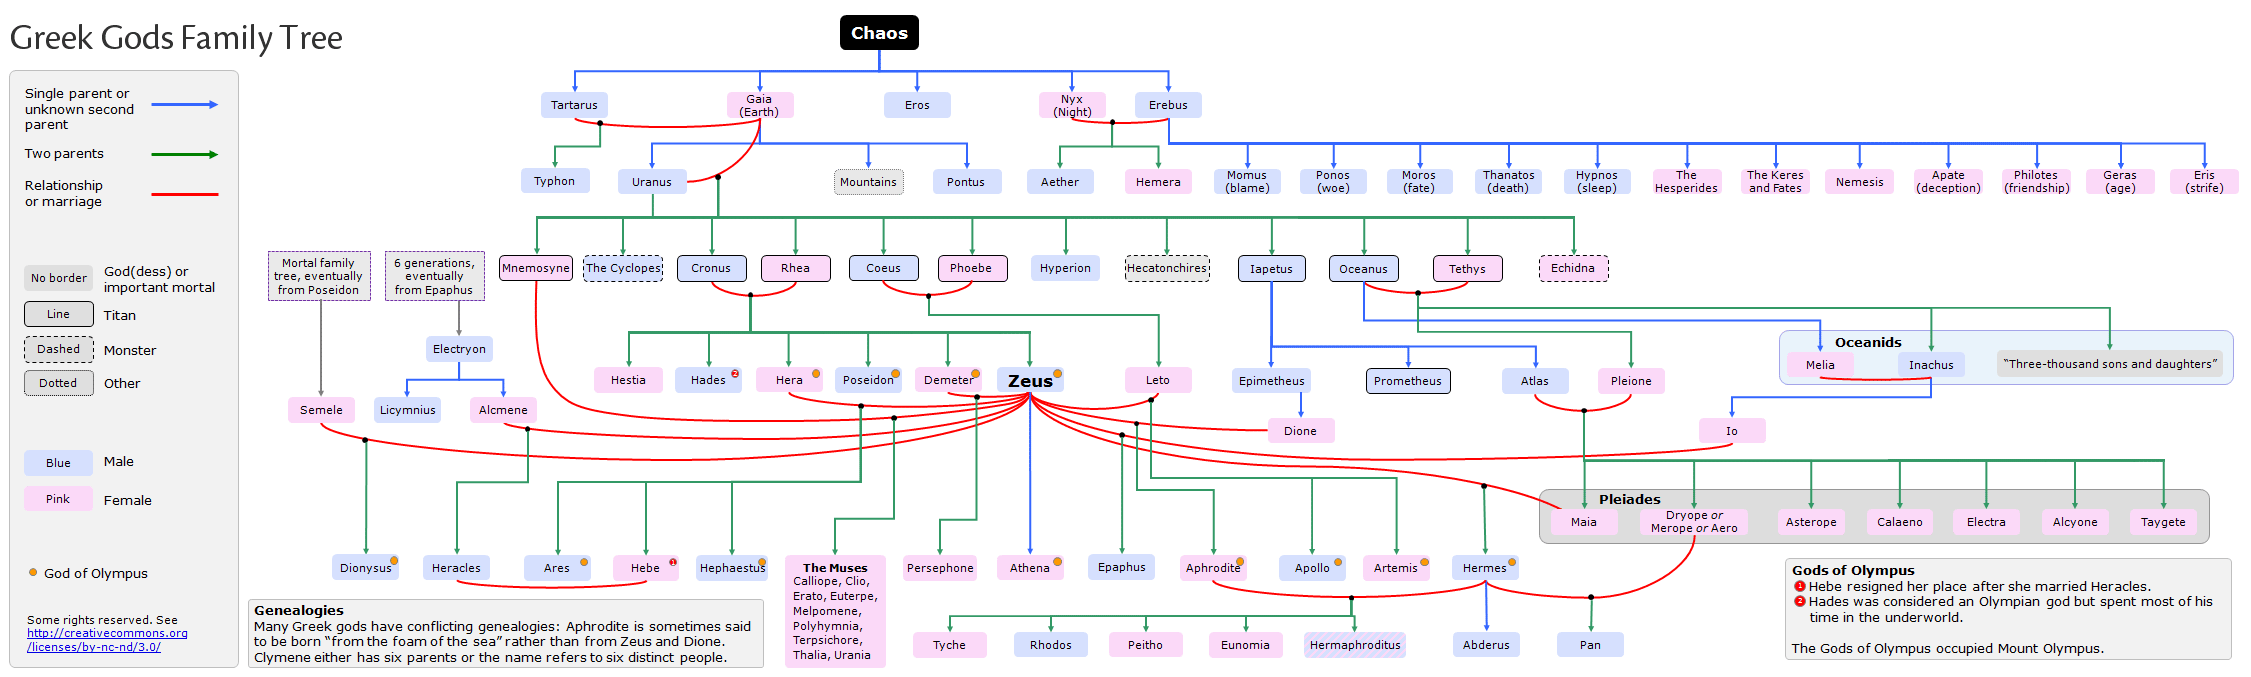 Family tree chart of the Titans